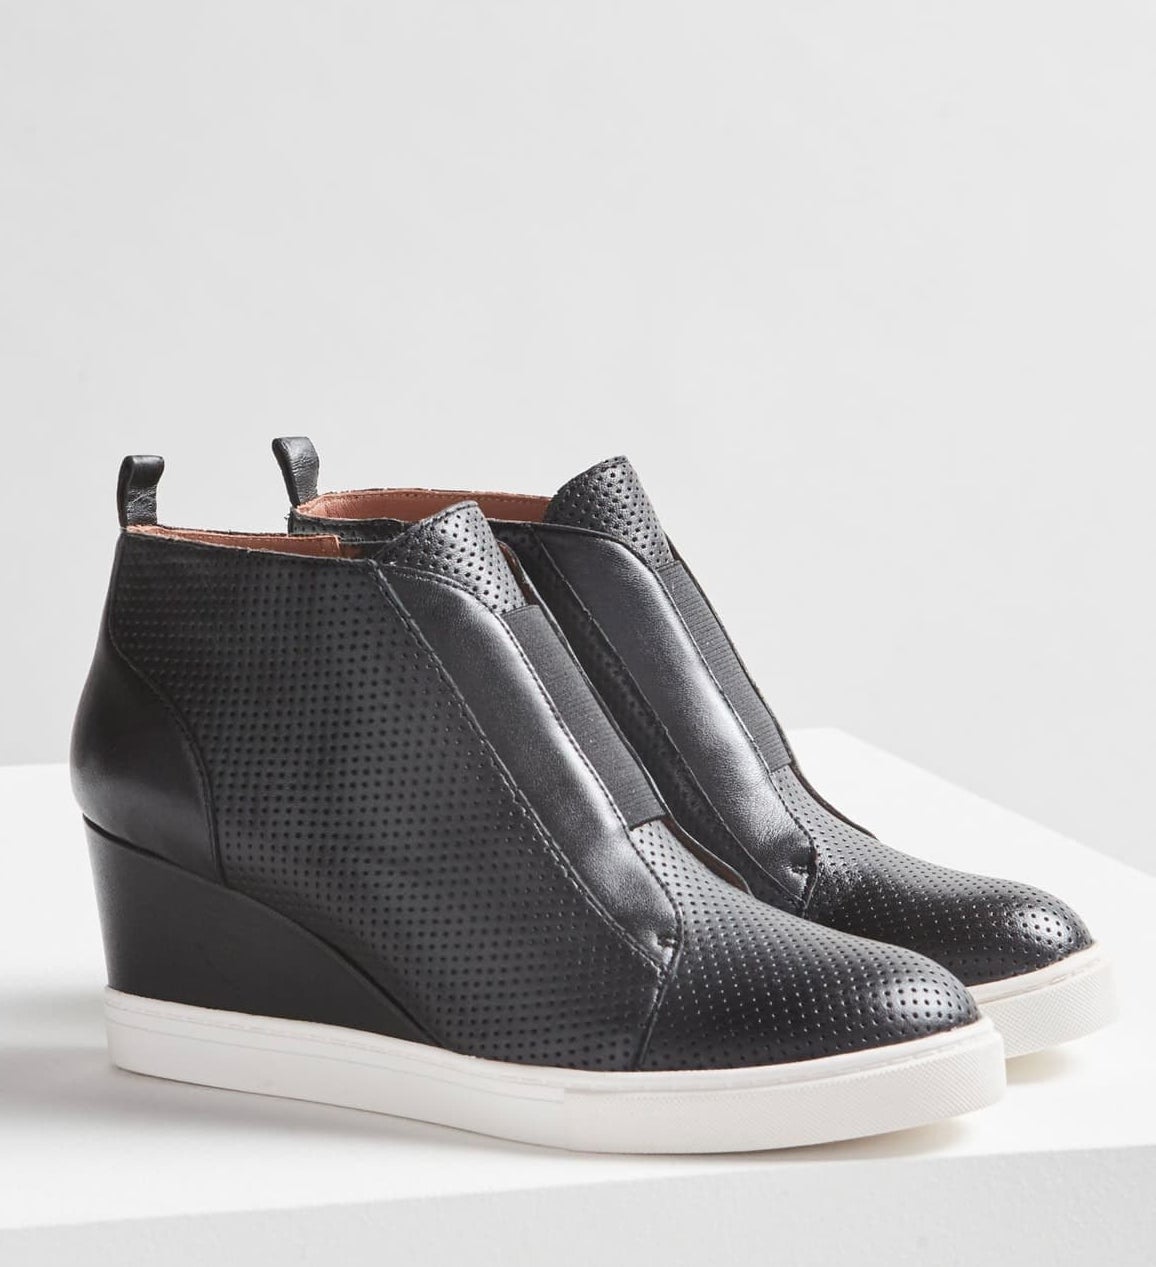 the leather wedges with a sneaker sole